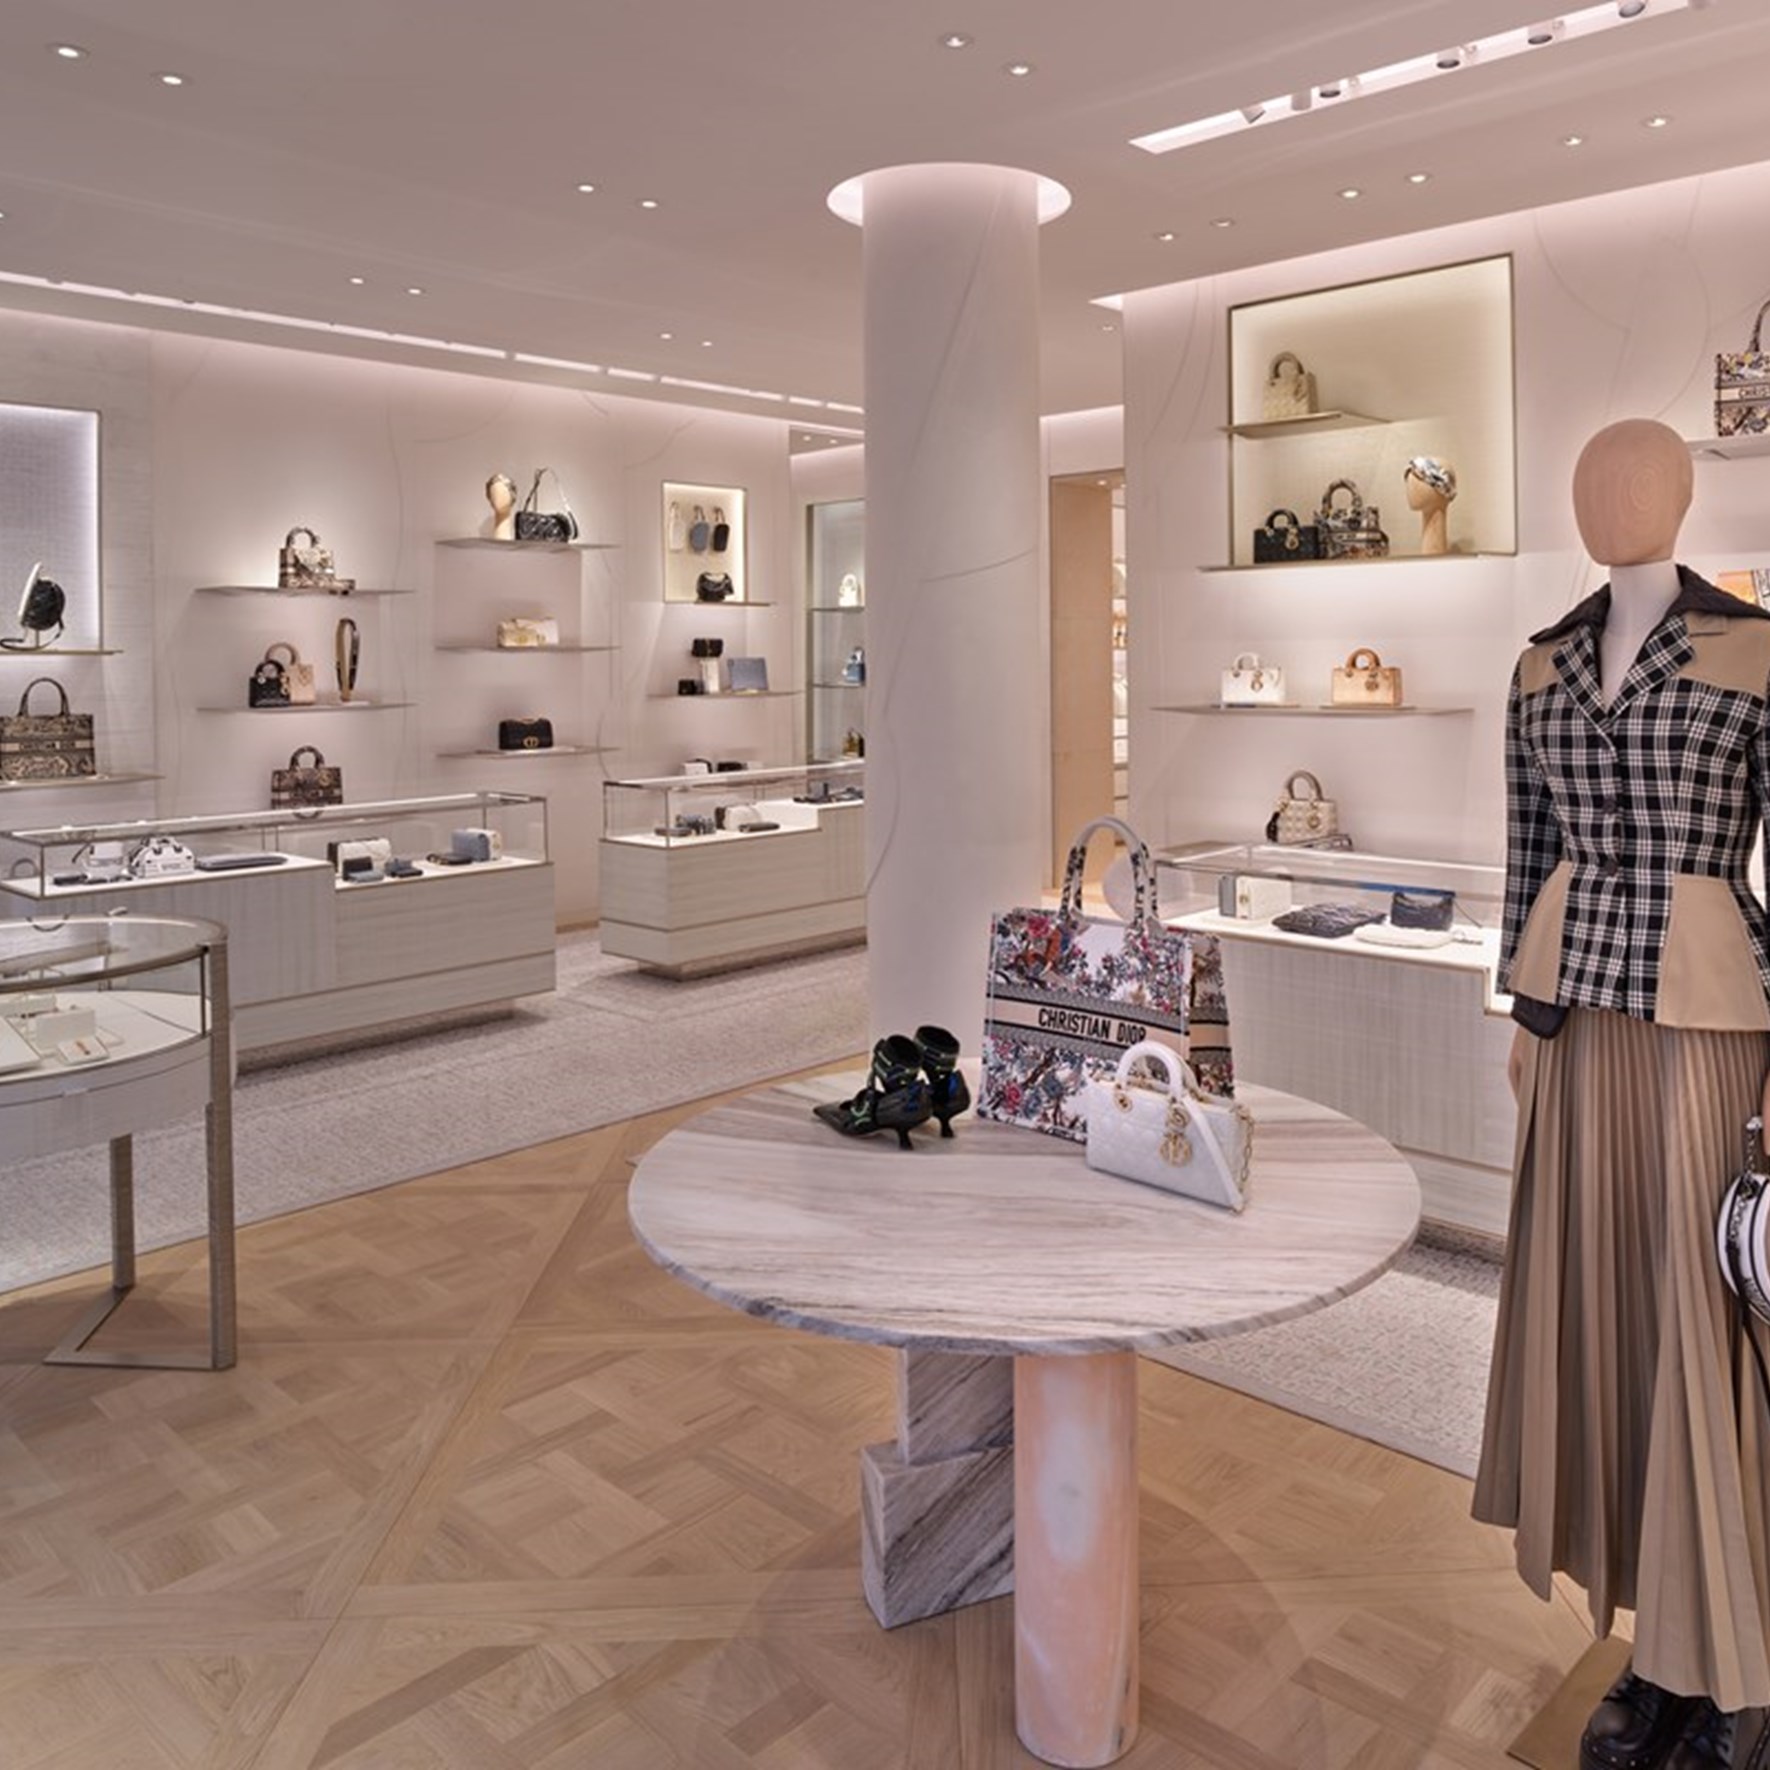 TAKE A LOOK INSIDE THE STORE:
DIOR